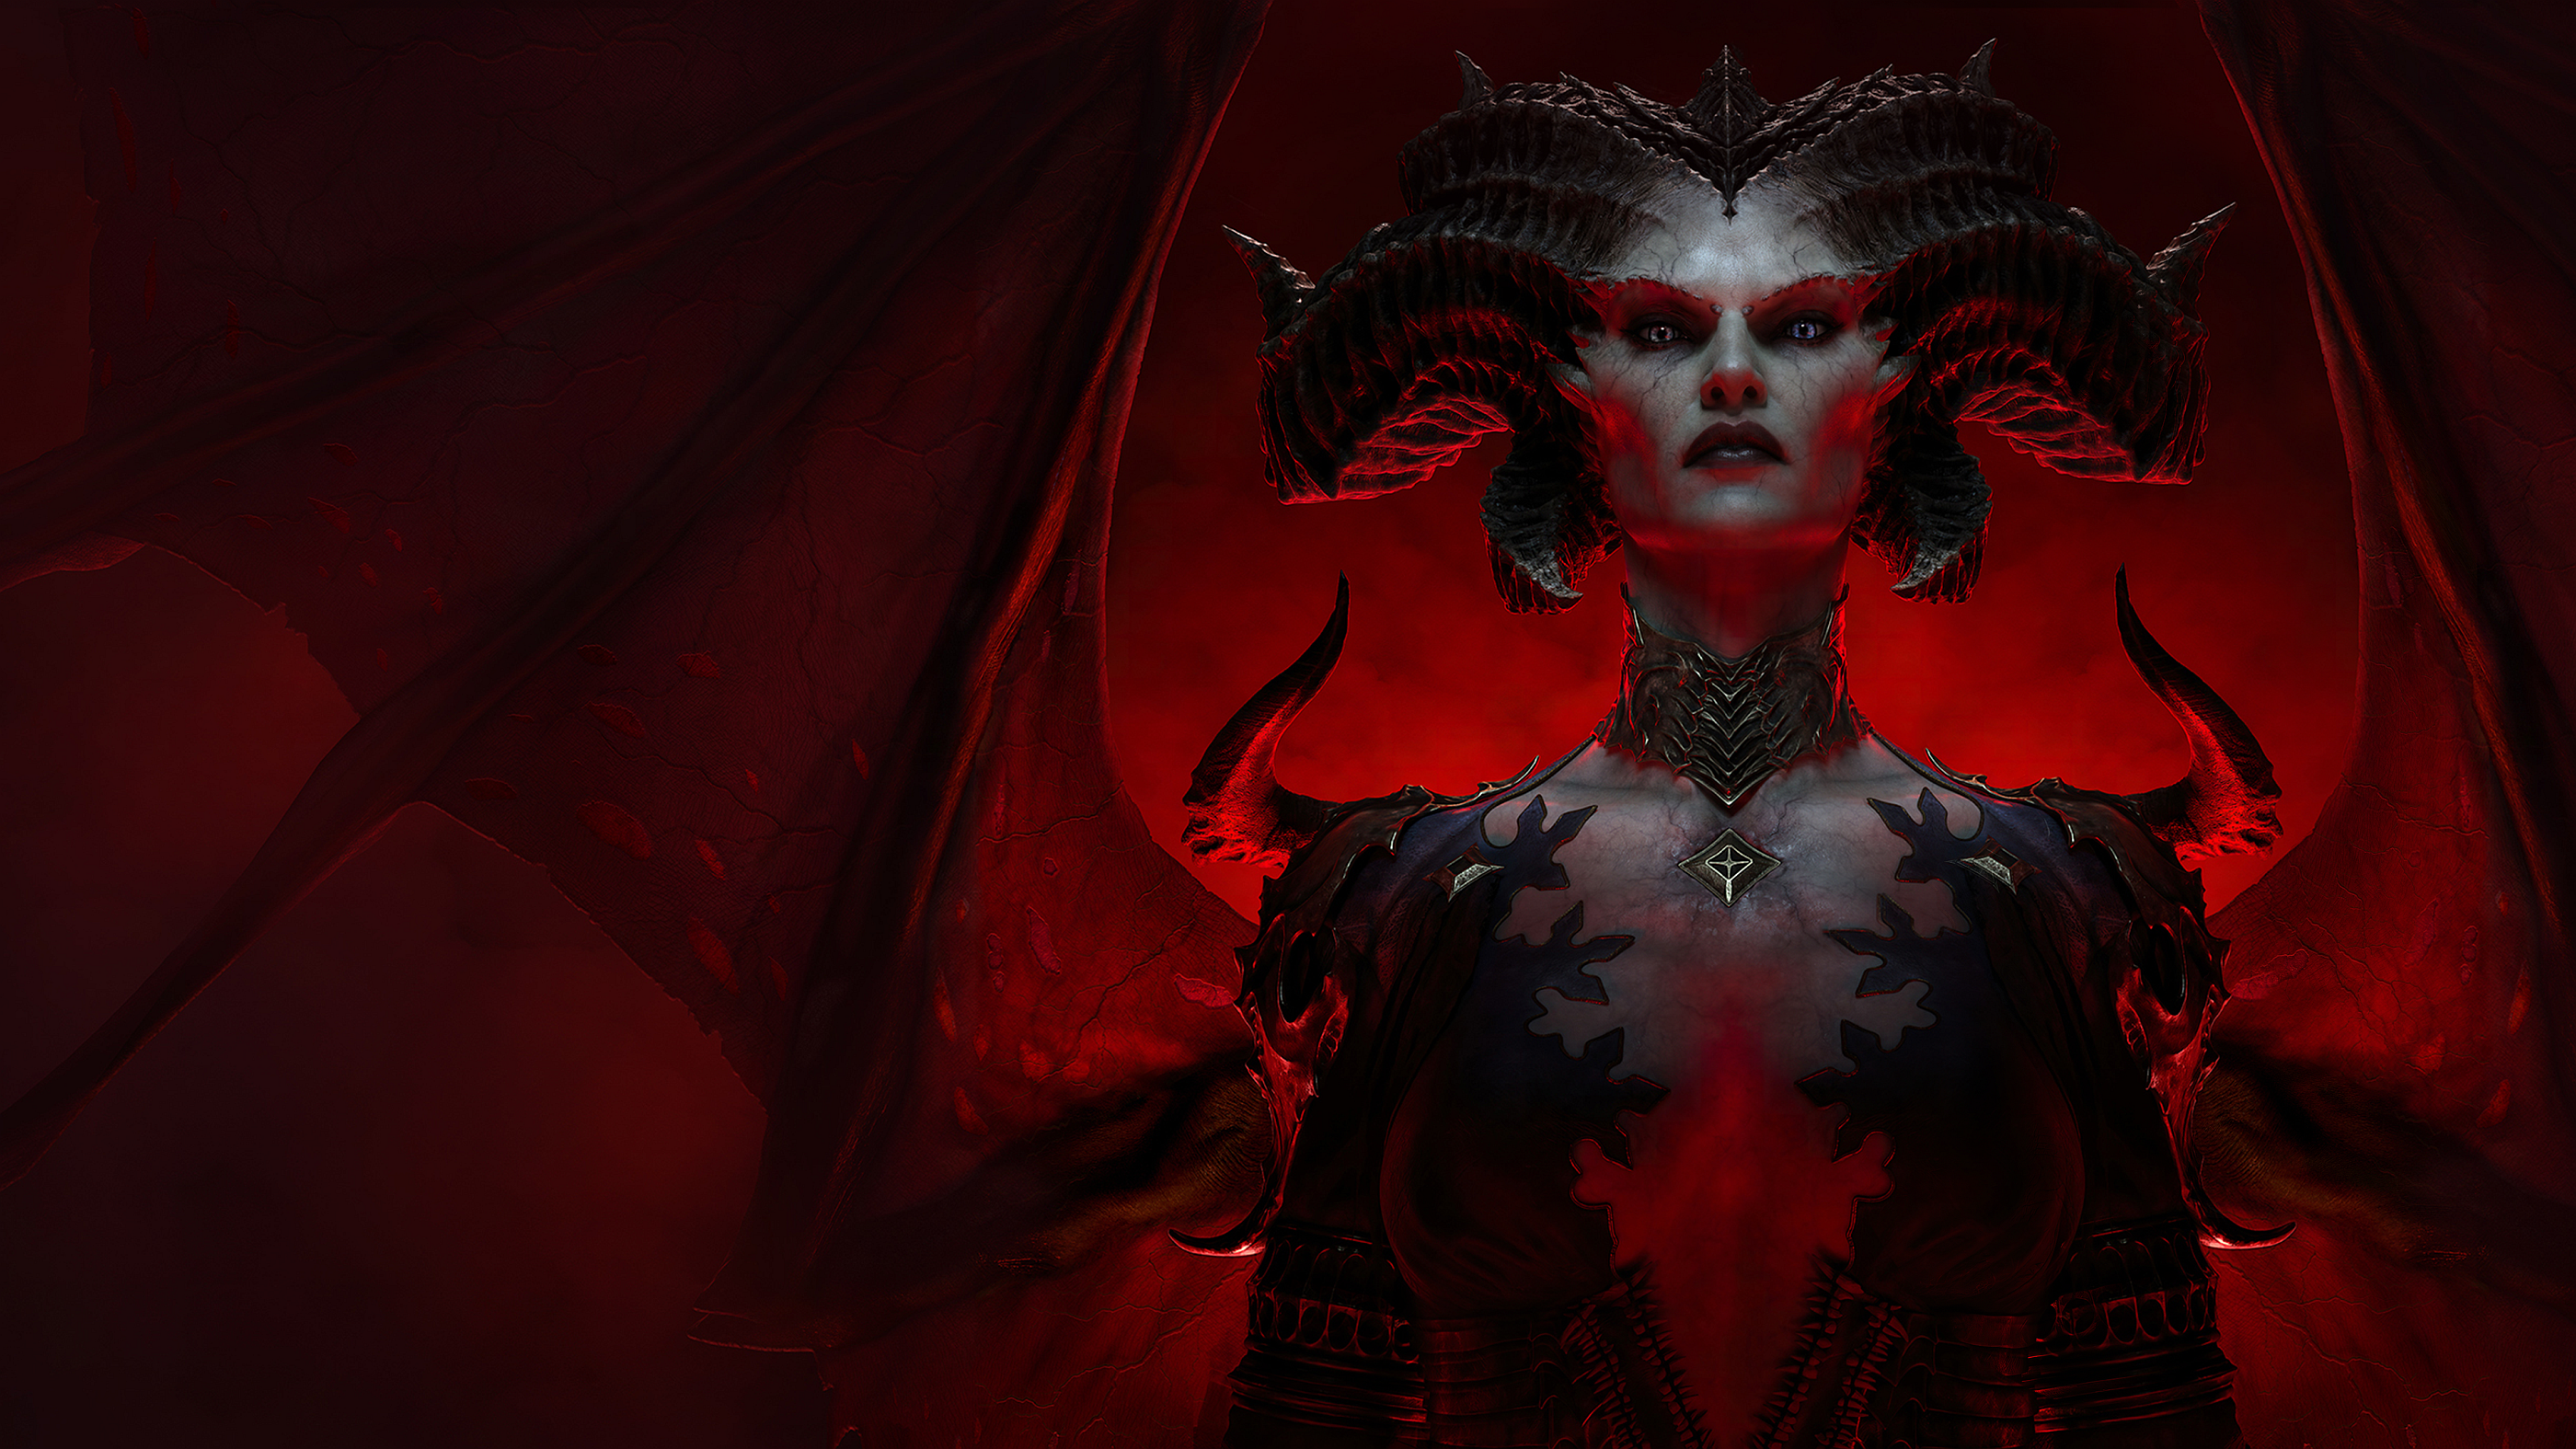 Lilith, the main antagonist of Diablo 4, looks over menacingly.